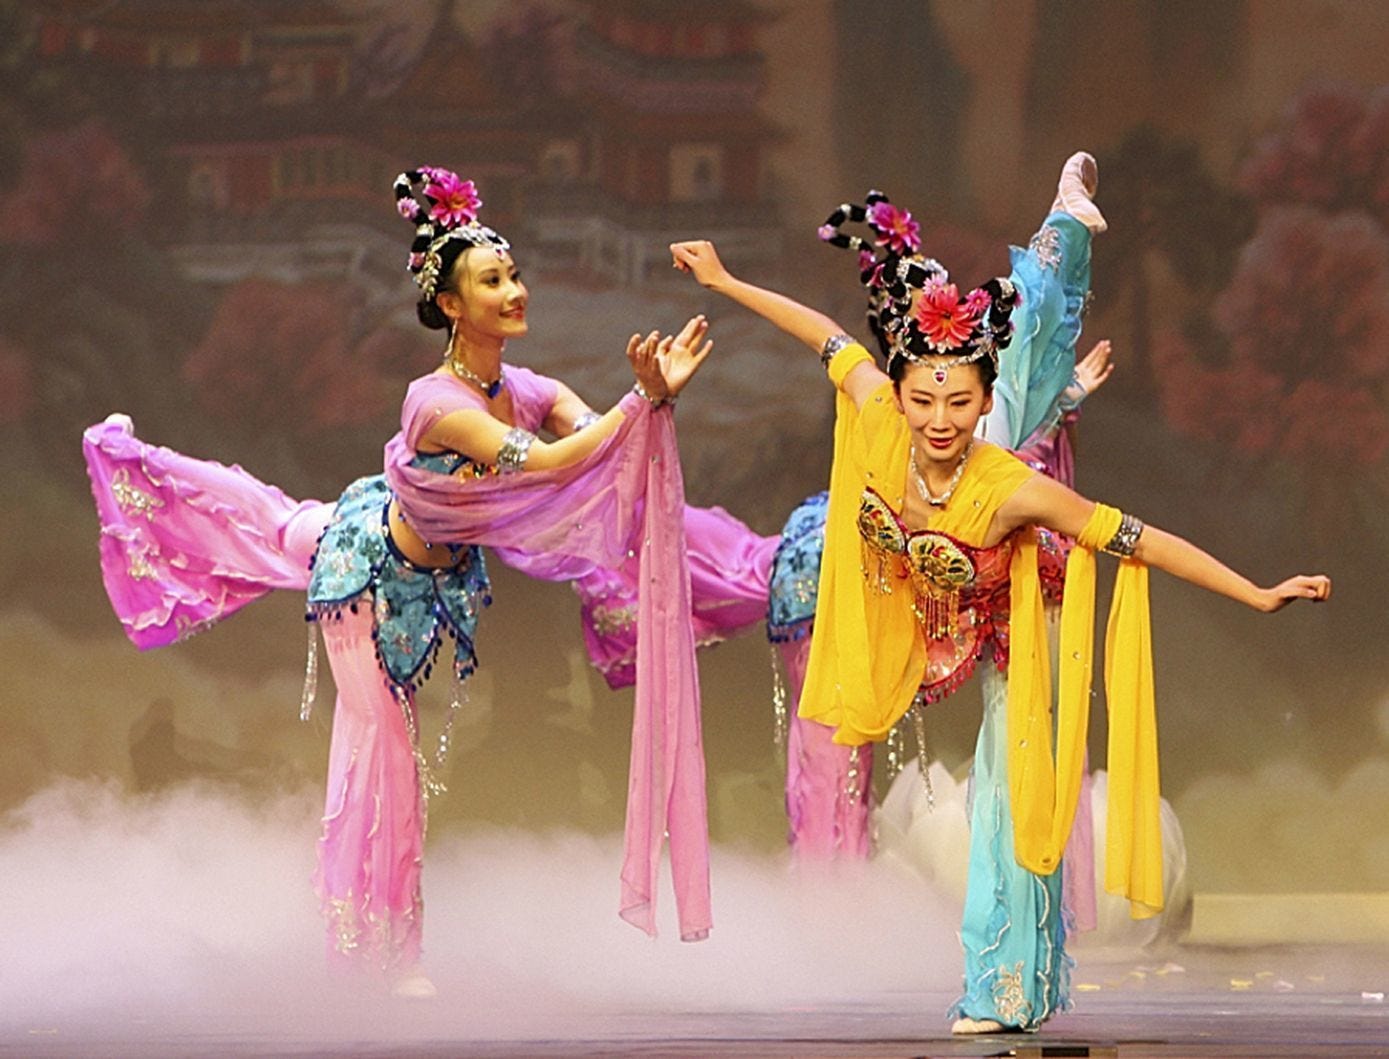 Shen Yun Performing Arts shows celebrate 5,000 years of Chinese culture and history.